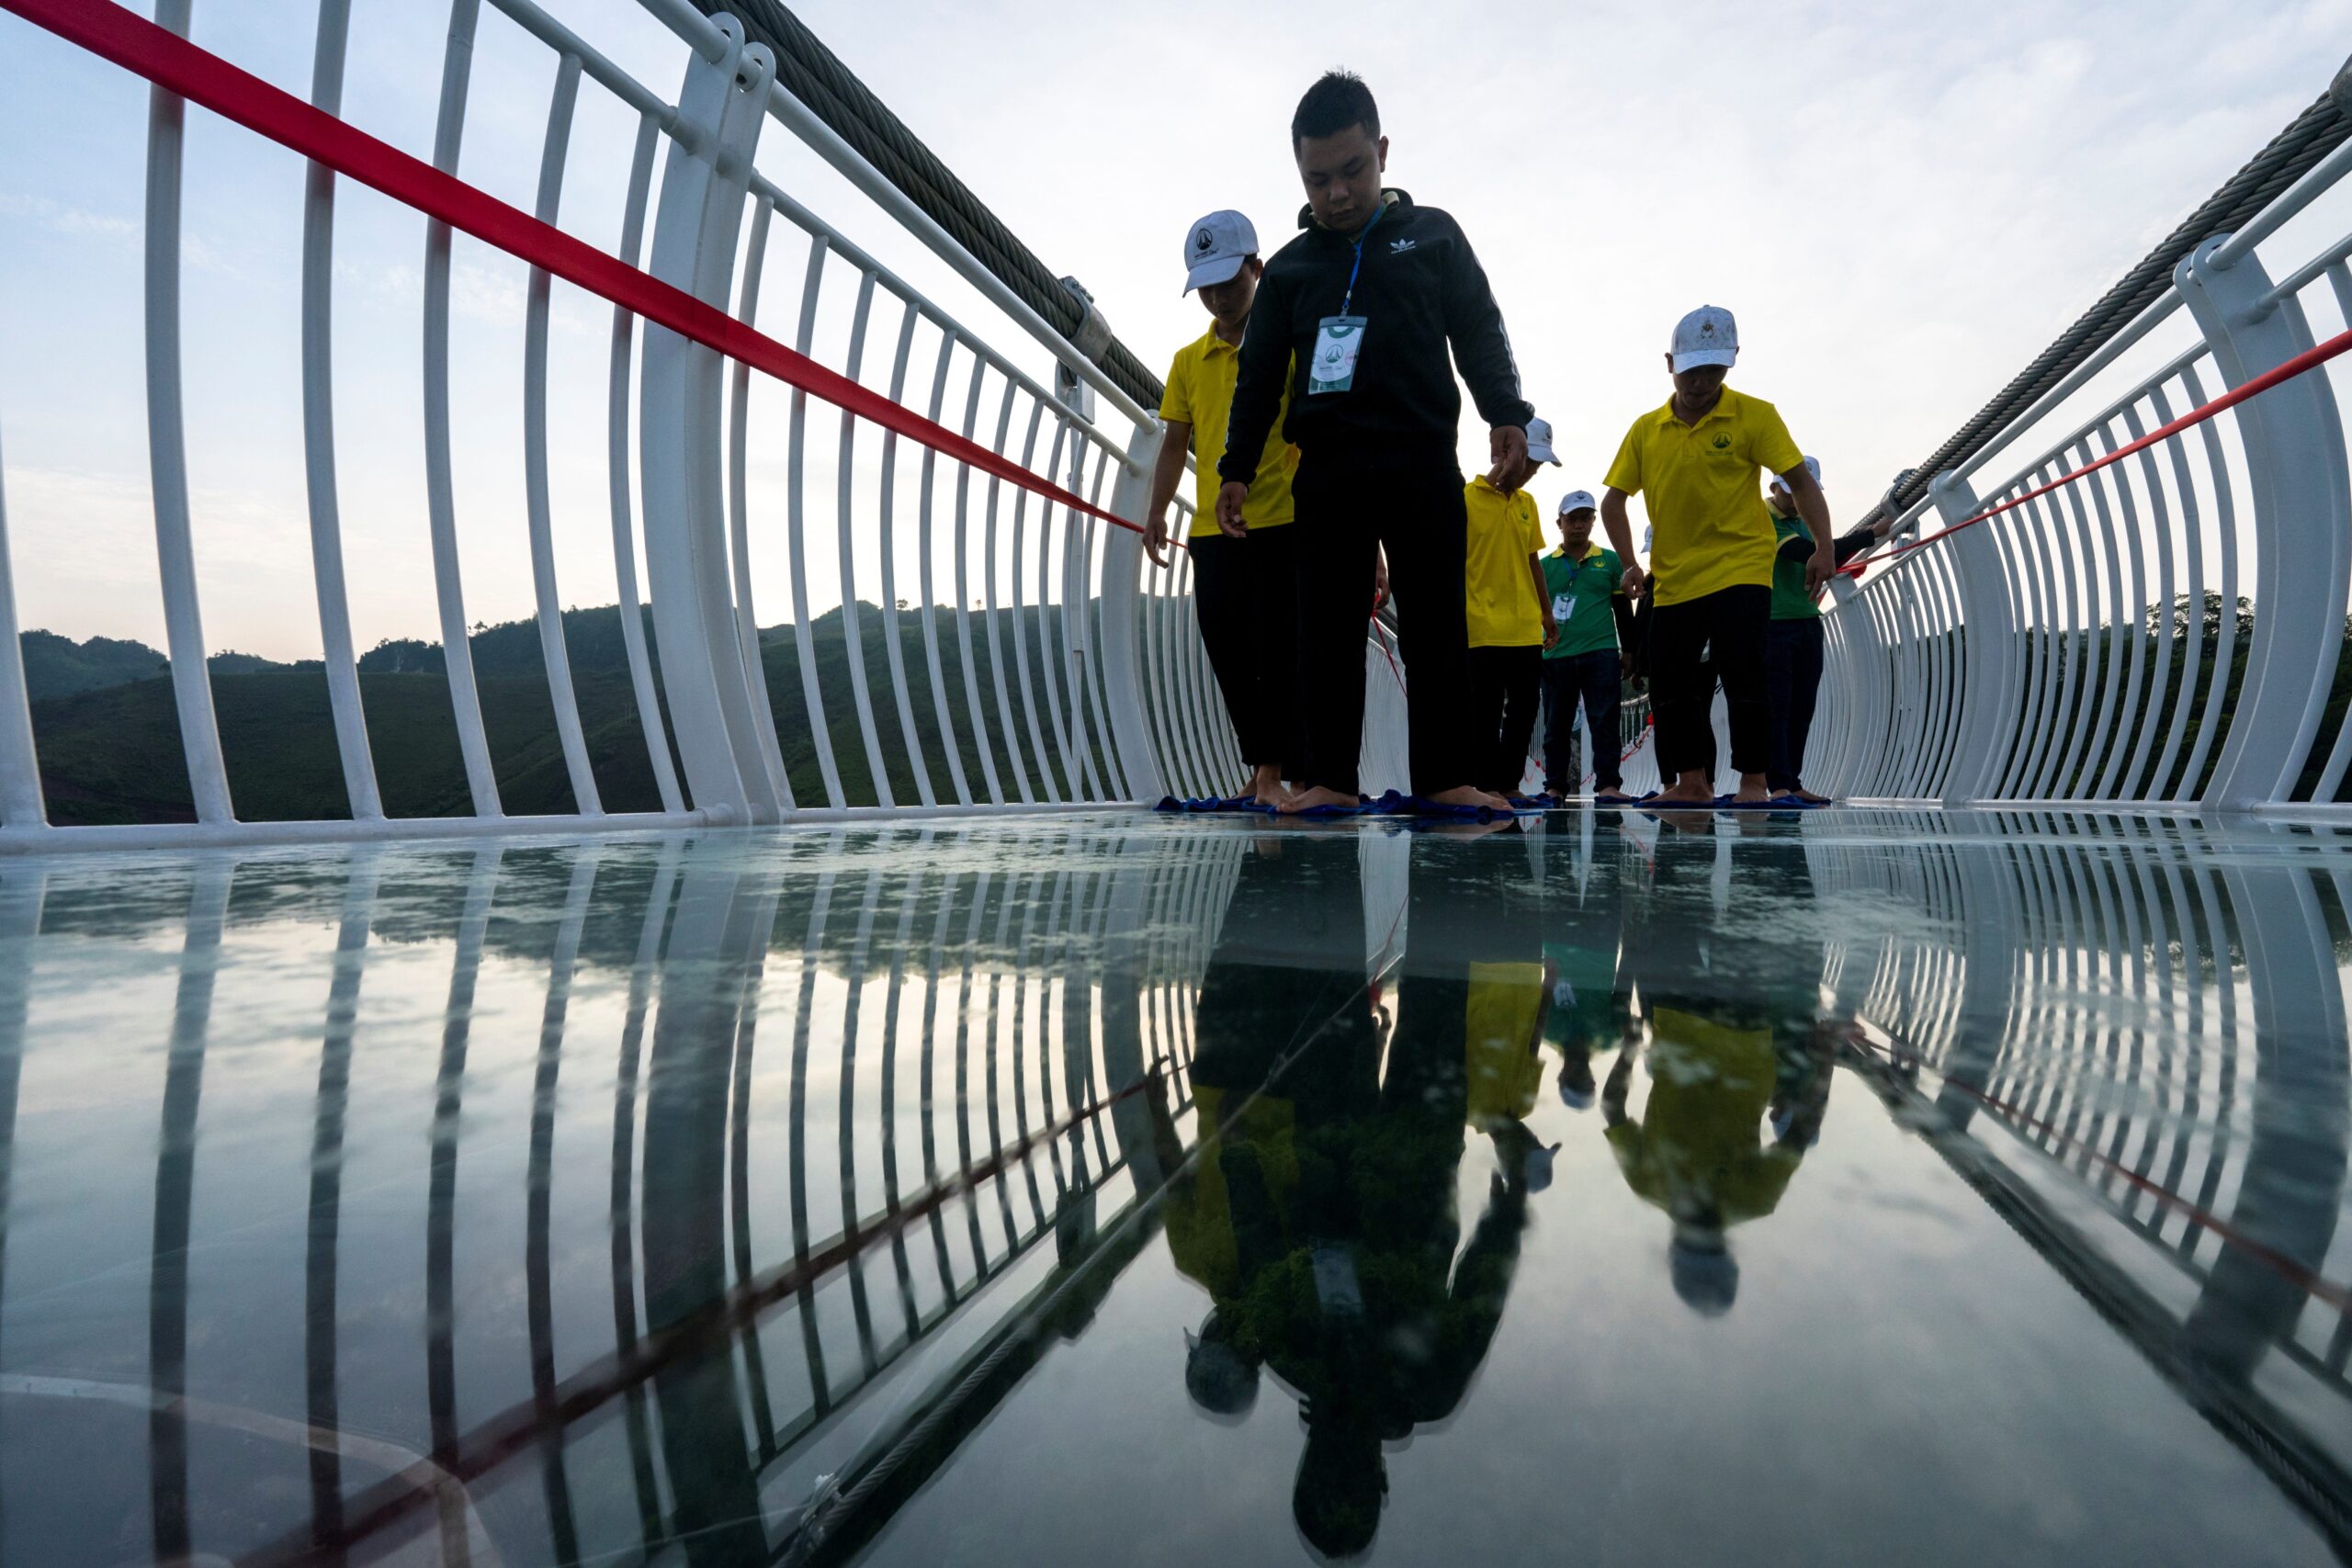 Workers clean the Bach Long glass bridge ahead of the opening ceremony at Moc Chau district in Son La province, Vietnam, May 28, 2022. Picture taken May 28, 2022.